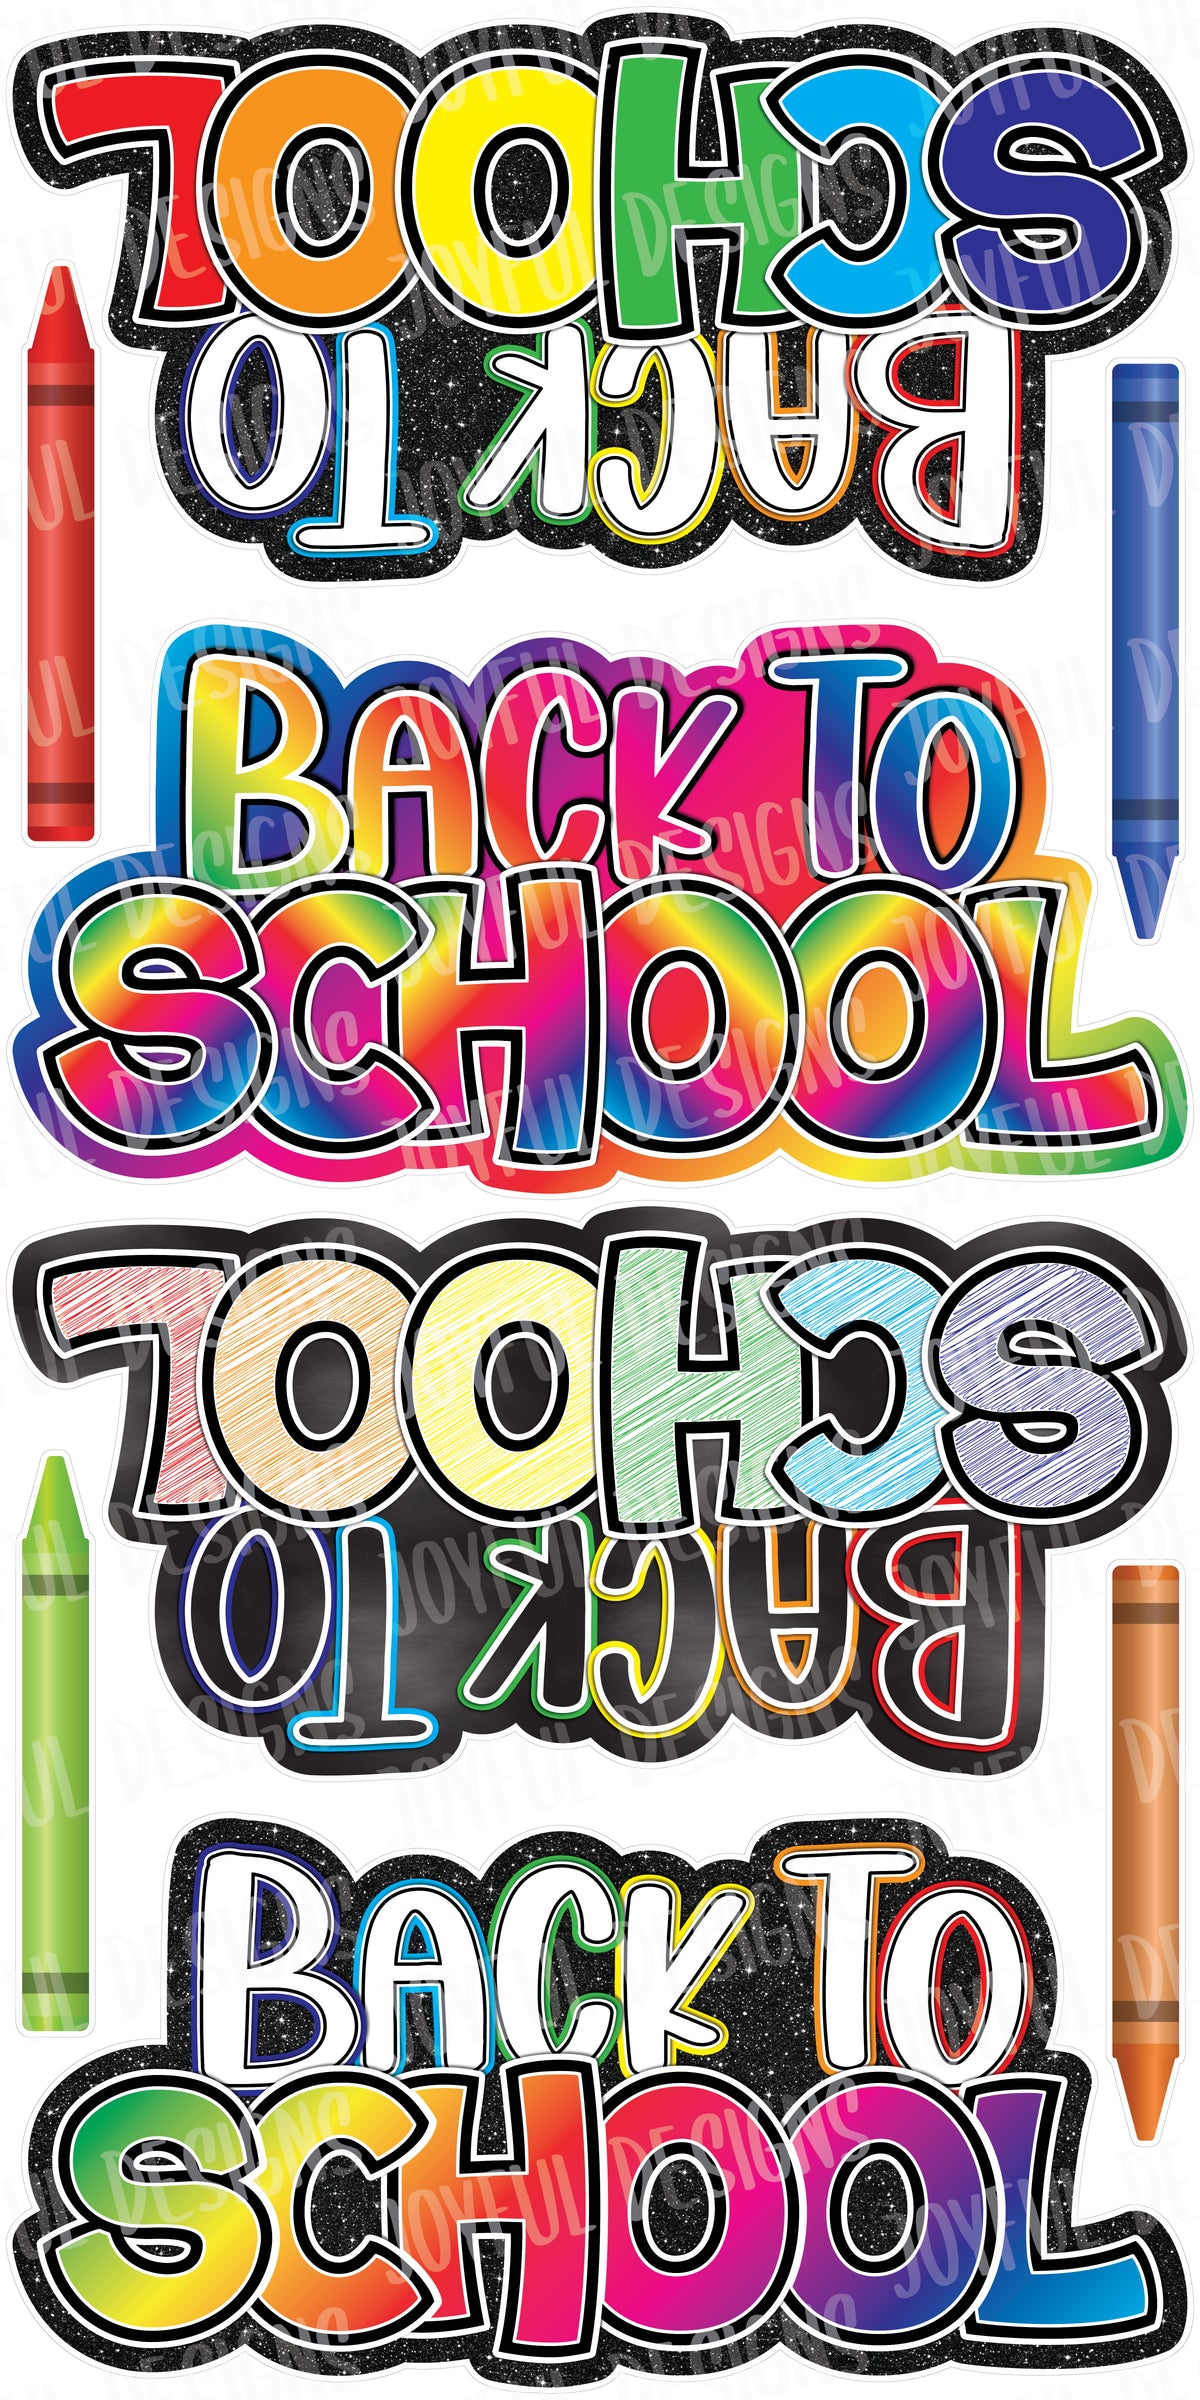 4 Back to School Centerpieces - Bouncy Font - With Backgrounds